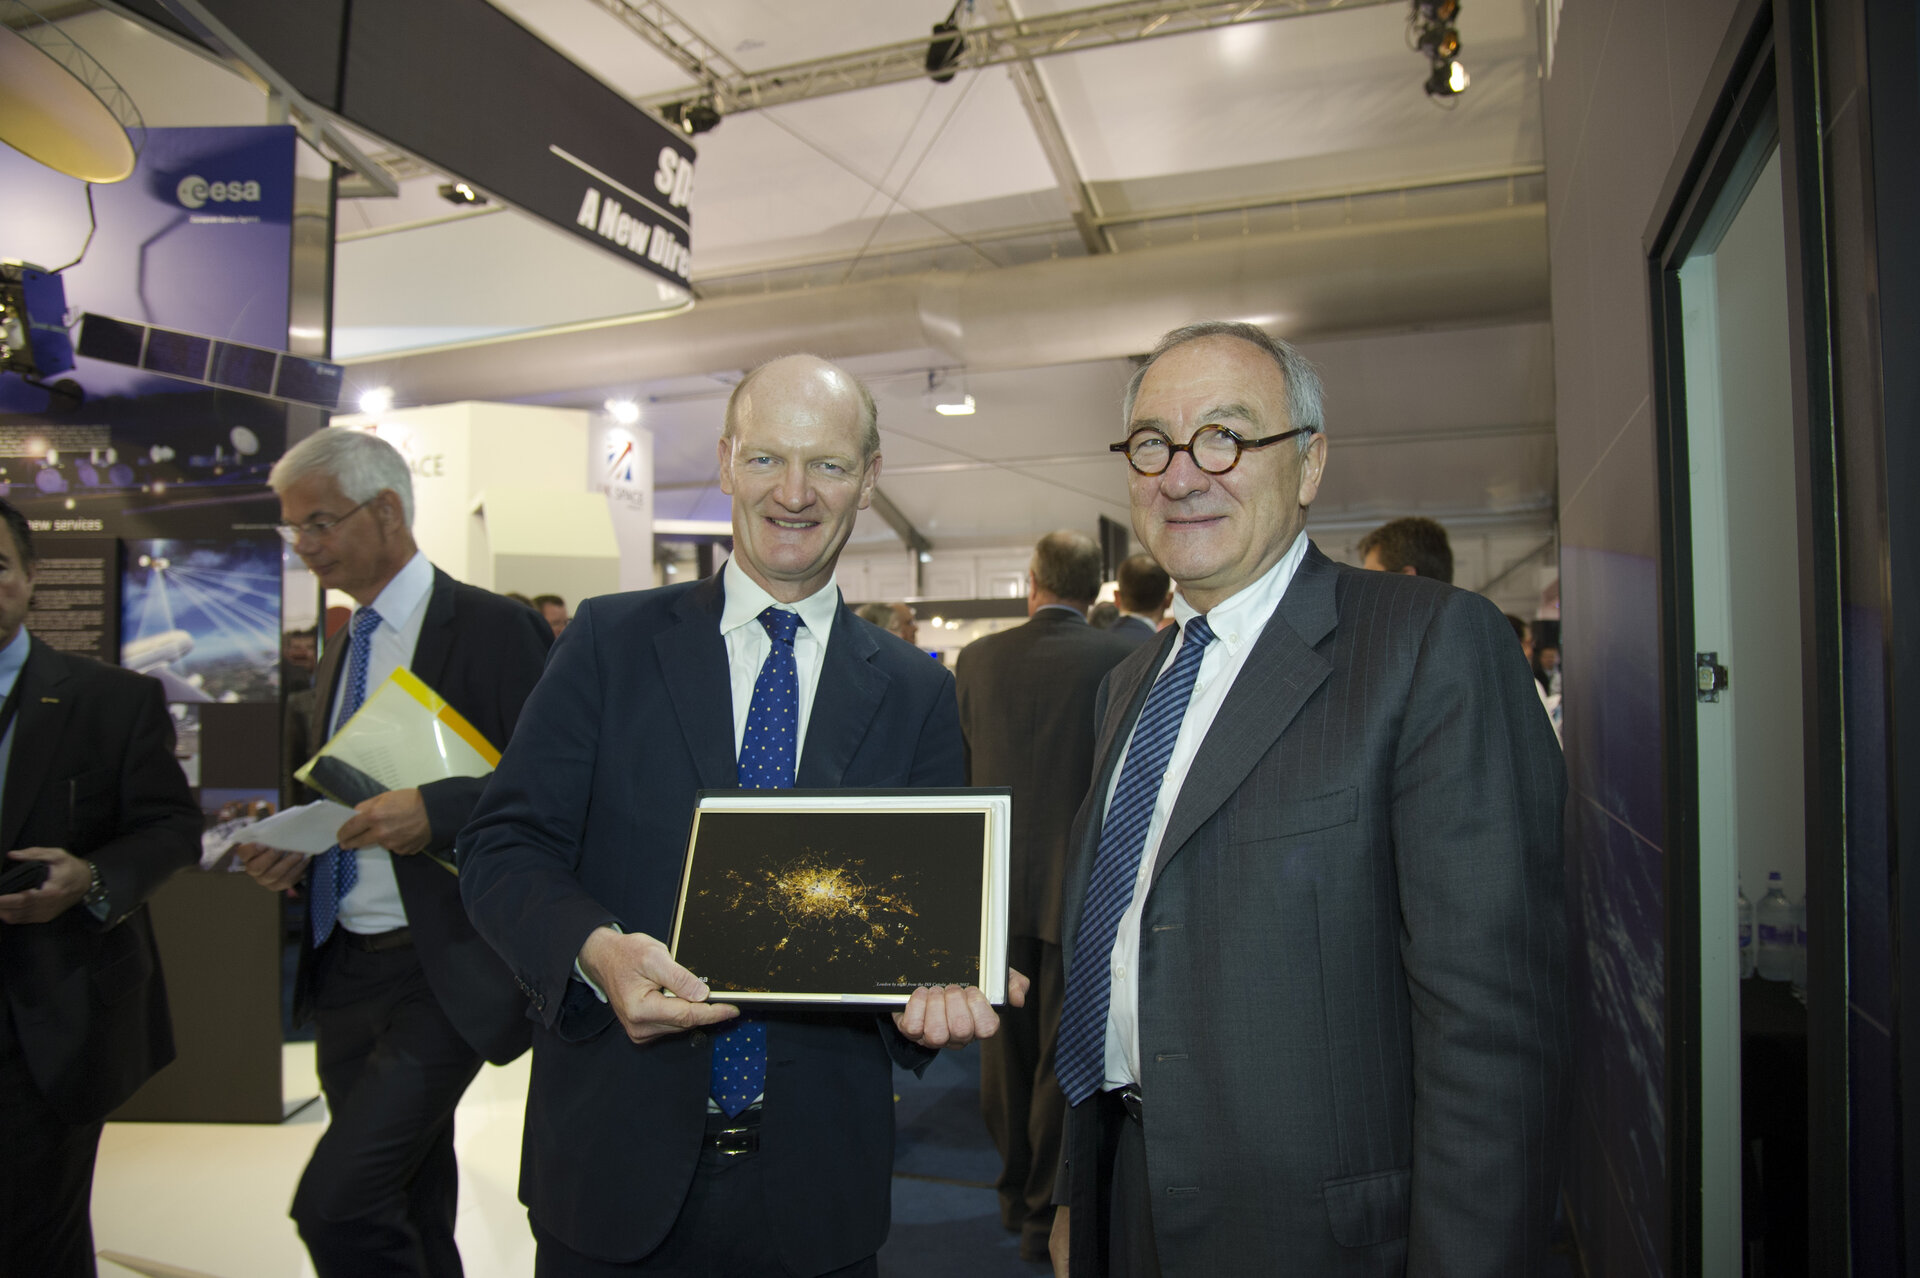 Jean-Jacques Dordain welcomes David Willetts at Farnborough airshow, 10 July 2012